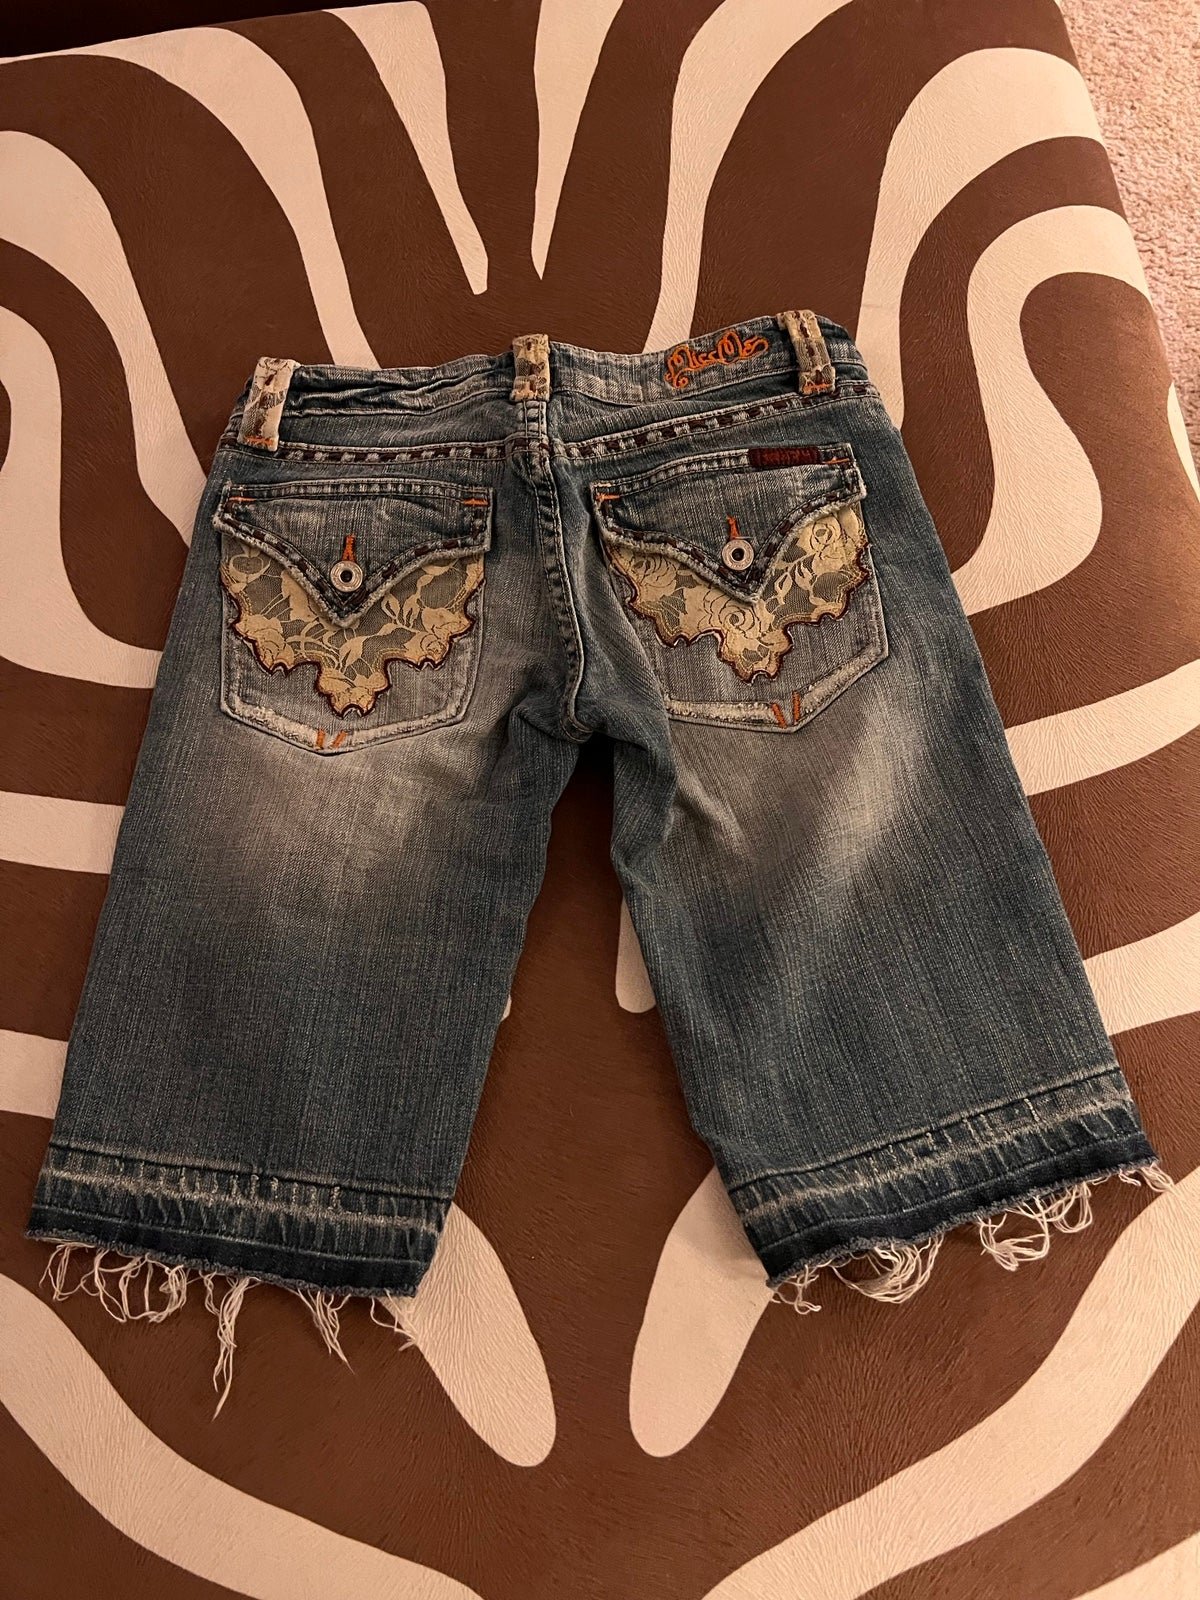 Beautiful Miss Me Capri Jeans NWOT FGEu8V5hL Everyday Low Prices